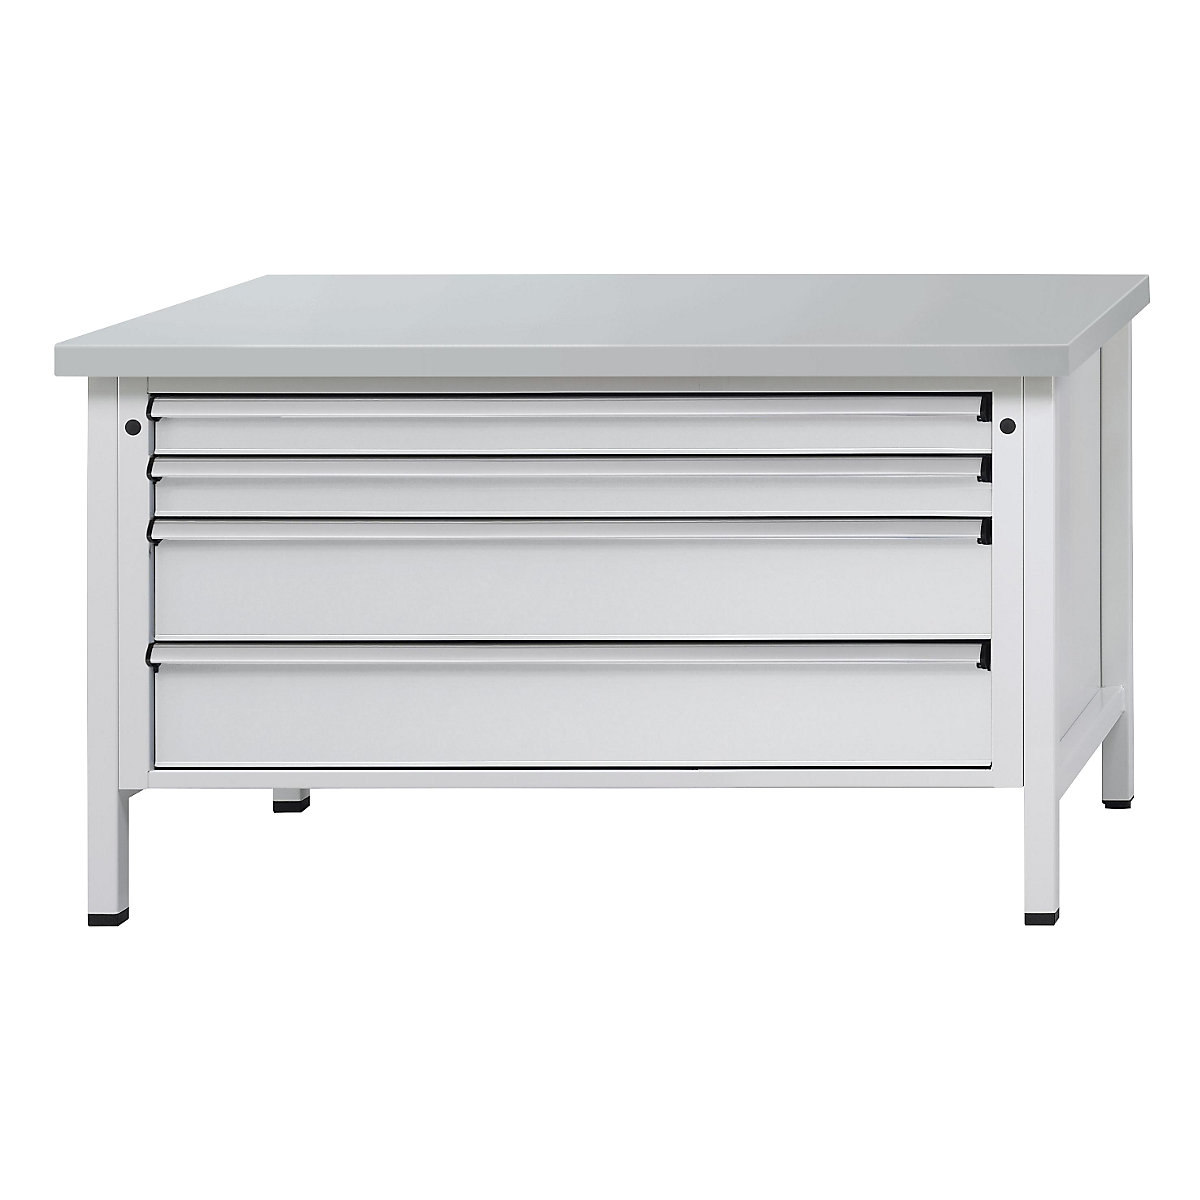 Workbench with XL/XXL drawers, frame construction – ANKE, width 1500 mm, 4 drawers, sheet steel covered worktop, front in light grey-9